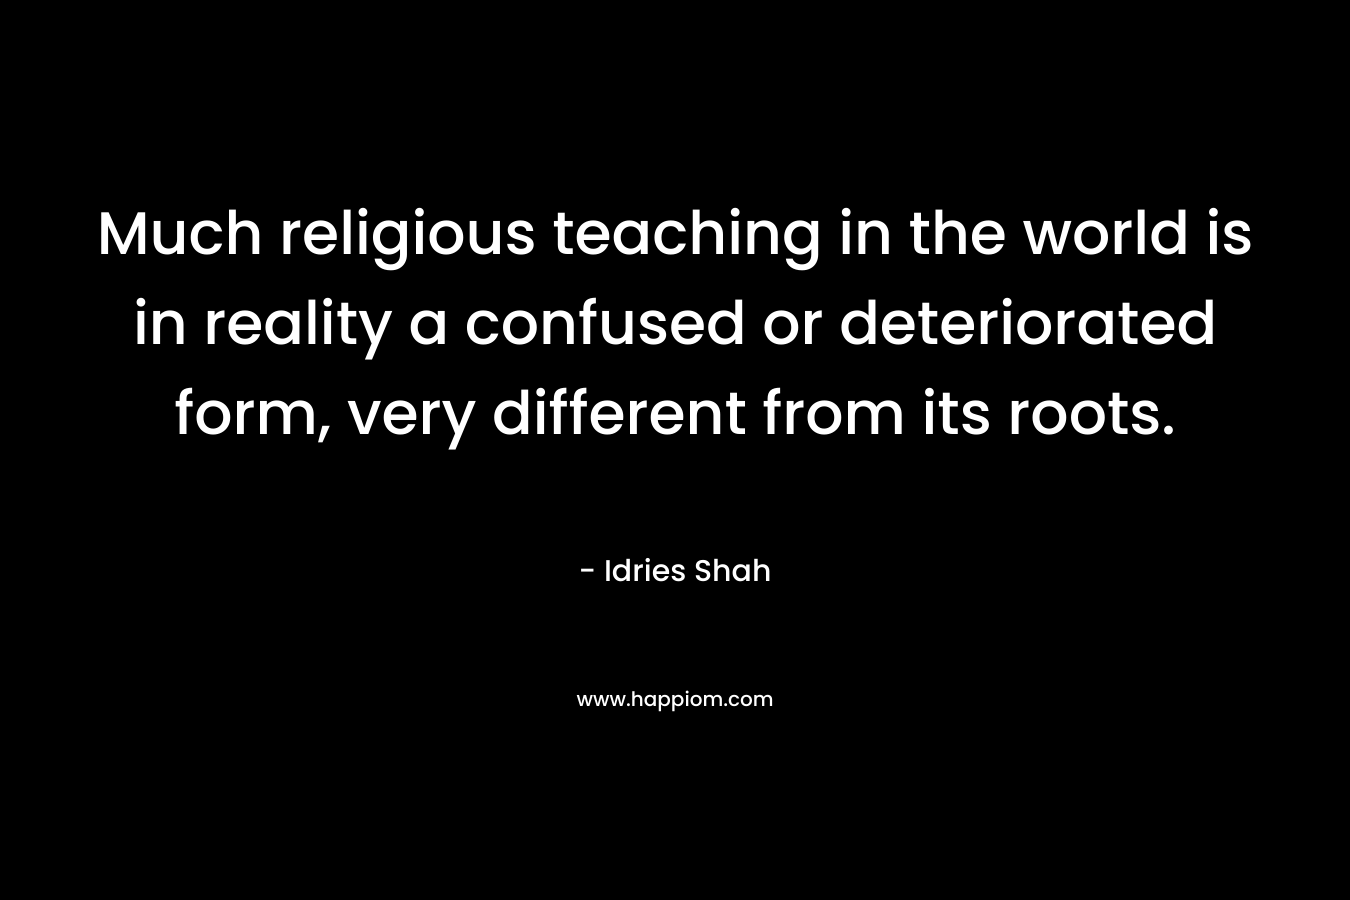 Much religious teaching in the world is in reality a confused or deteriorated form, very different from its roots. – Idries Shah